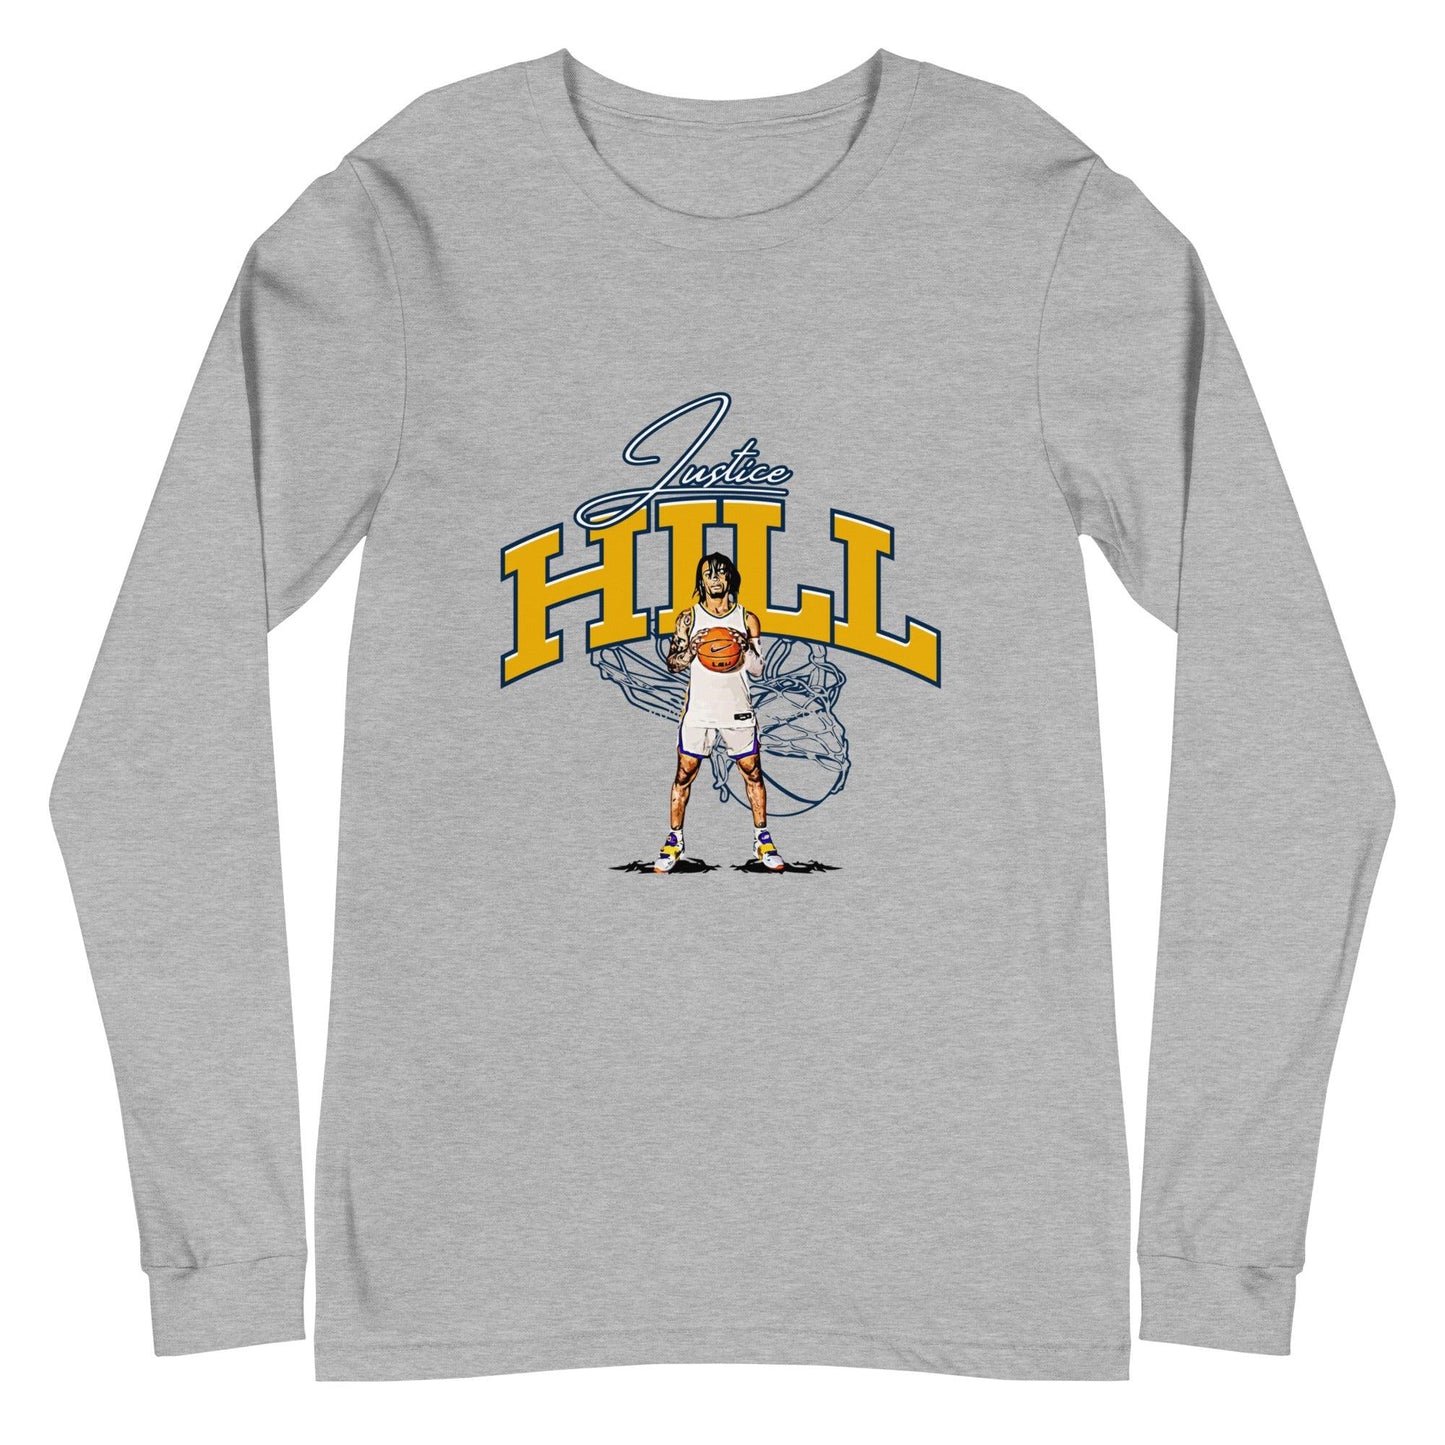 Justice Hill "Gameday" Long Sleeve Tee - Fan Arch